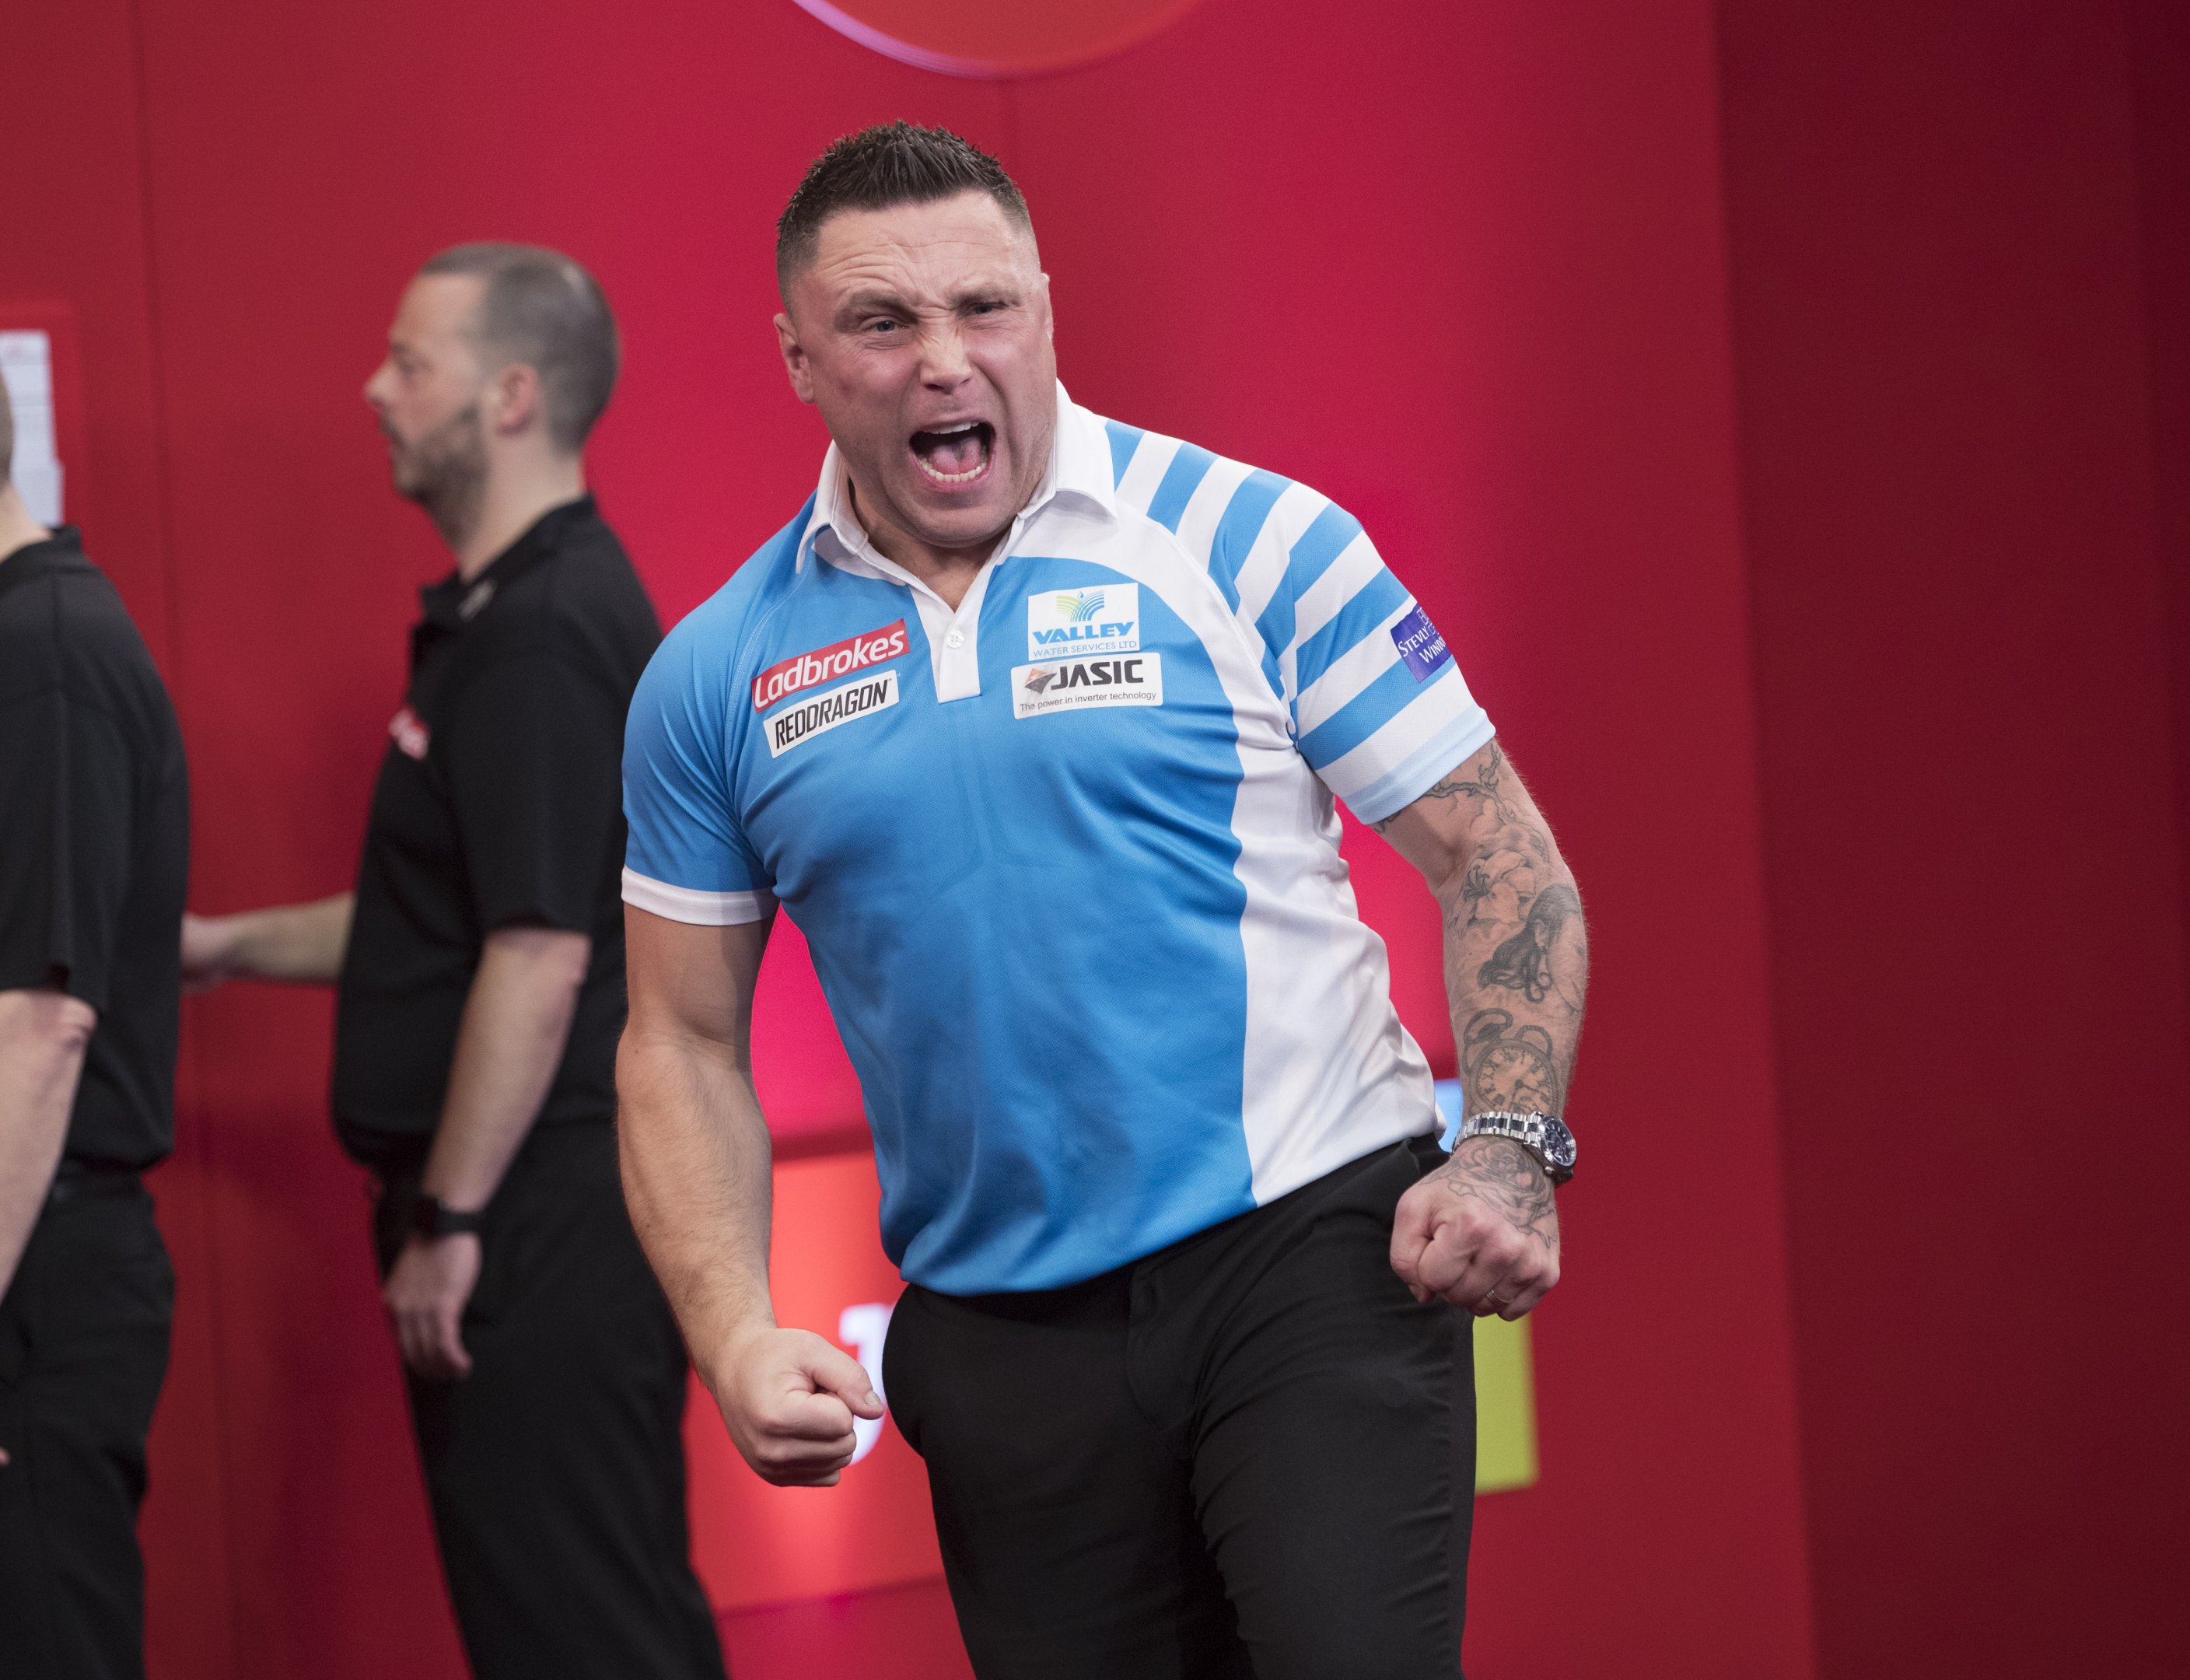 rig appetit gyde 2019 Ladbrokes UK Open Day Two | PDC